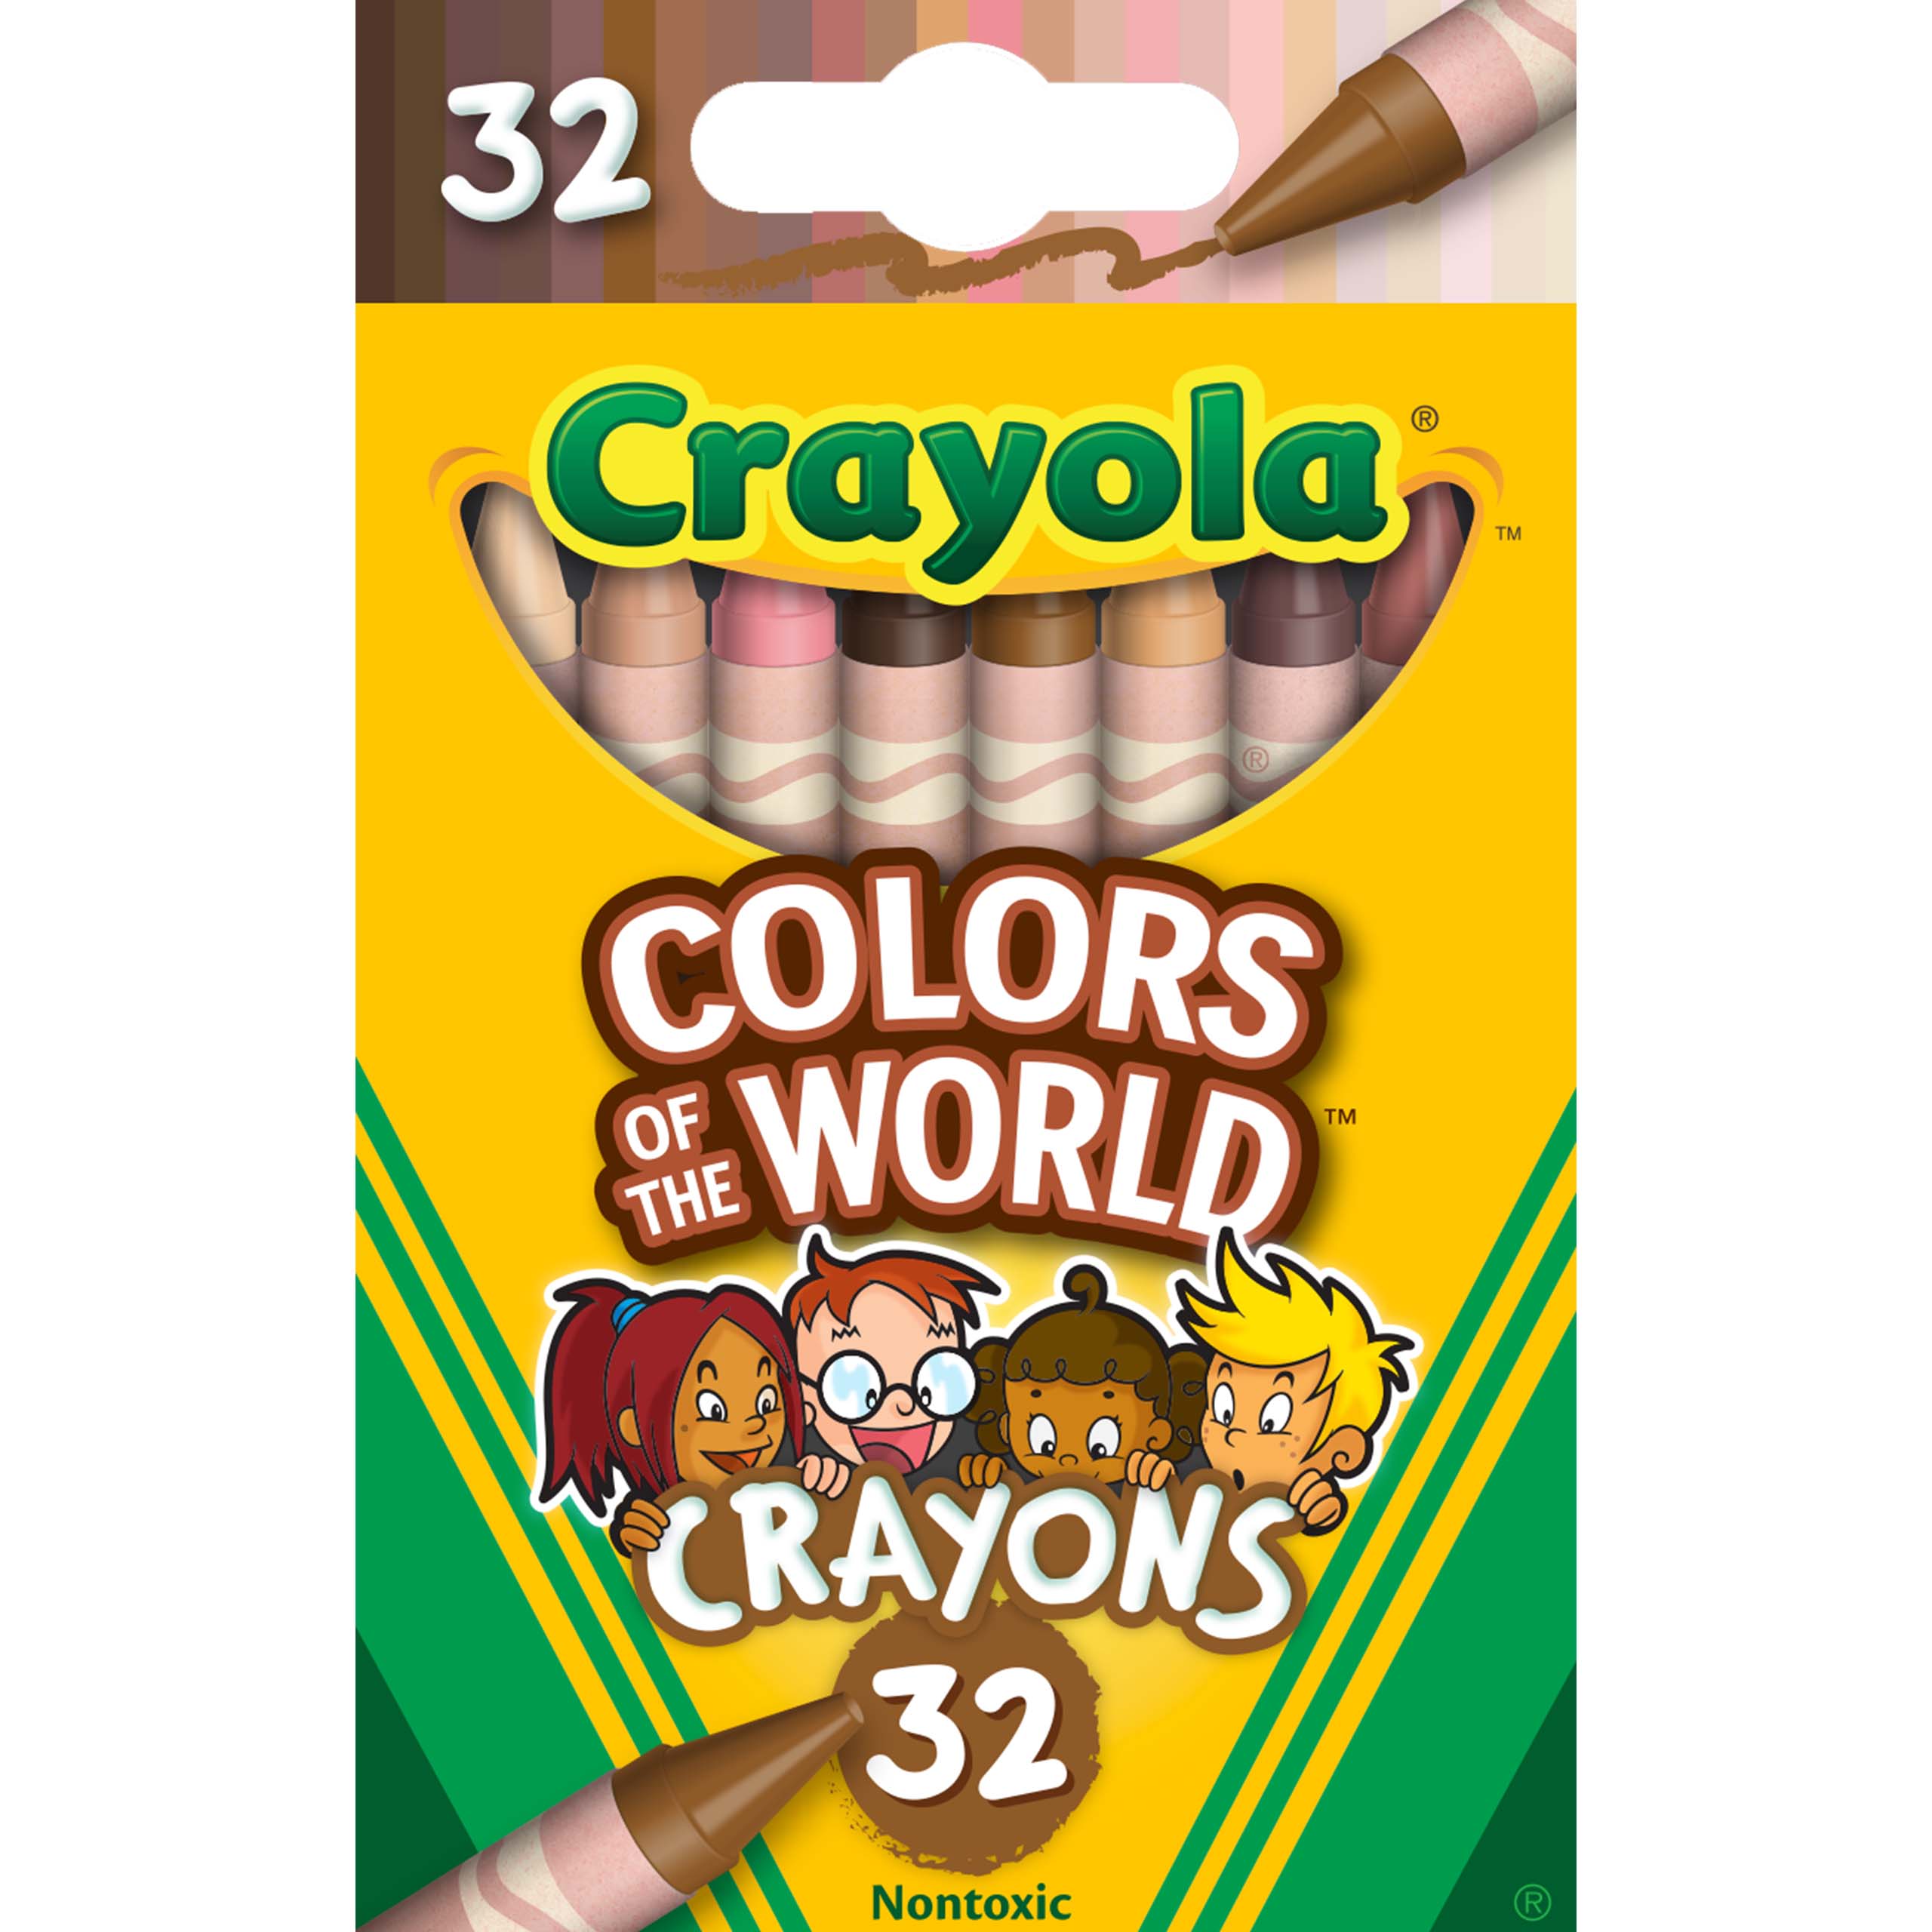 Crayola Colors of the World Skin Tone Crayons, 32 Ct, Back to School Supplies, Unisex Child - image 3 of 6